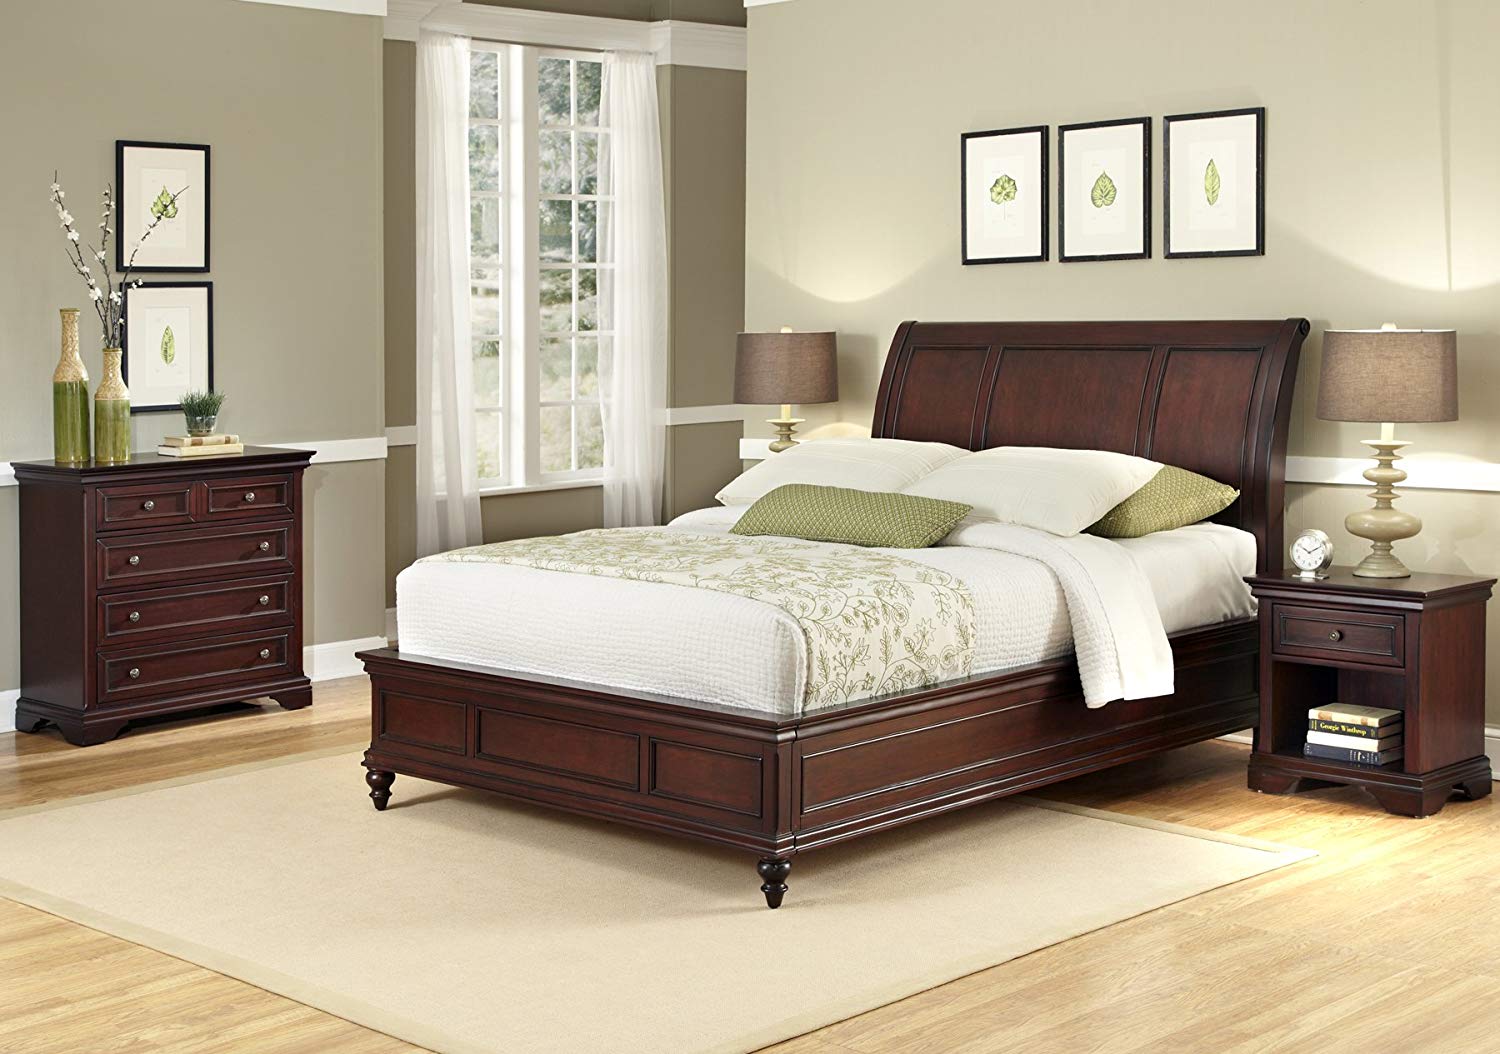 bedroom sets for sale cheap